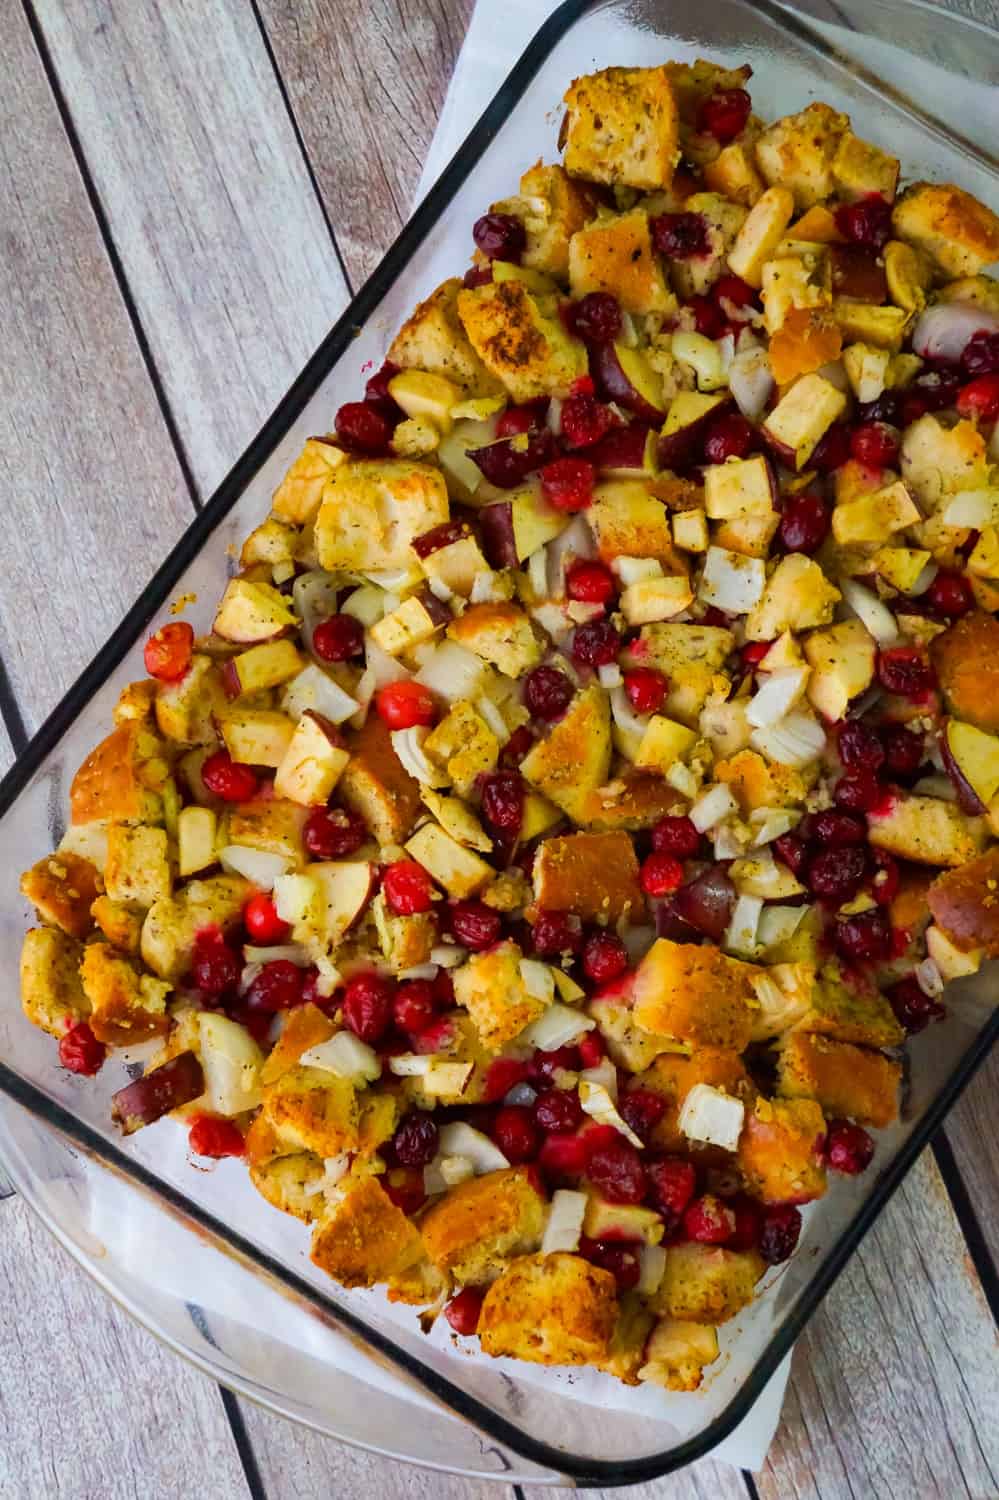 Cranberry Apple Thanksgiving Stuffing is an easy holiday side dish recipe. This baked stuffing is made with everything bagels and loaded with cranberries and diced apples.